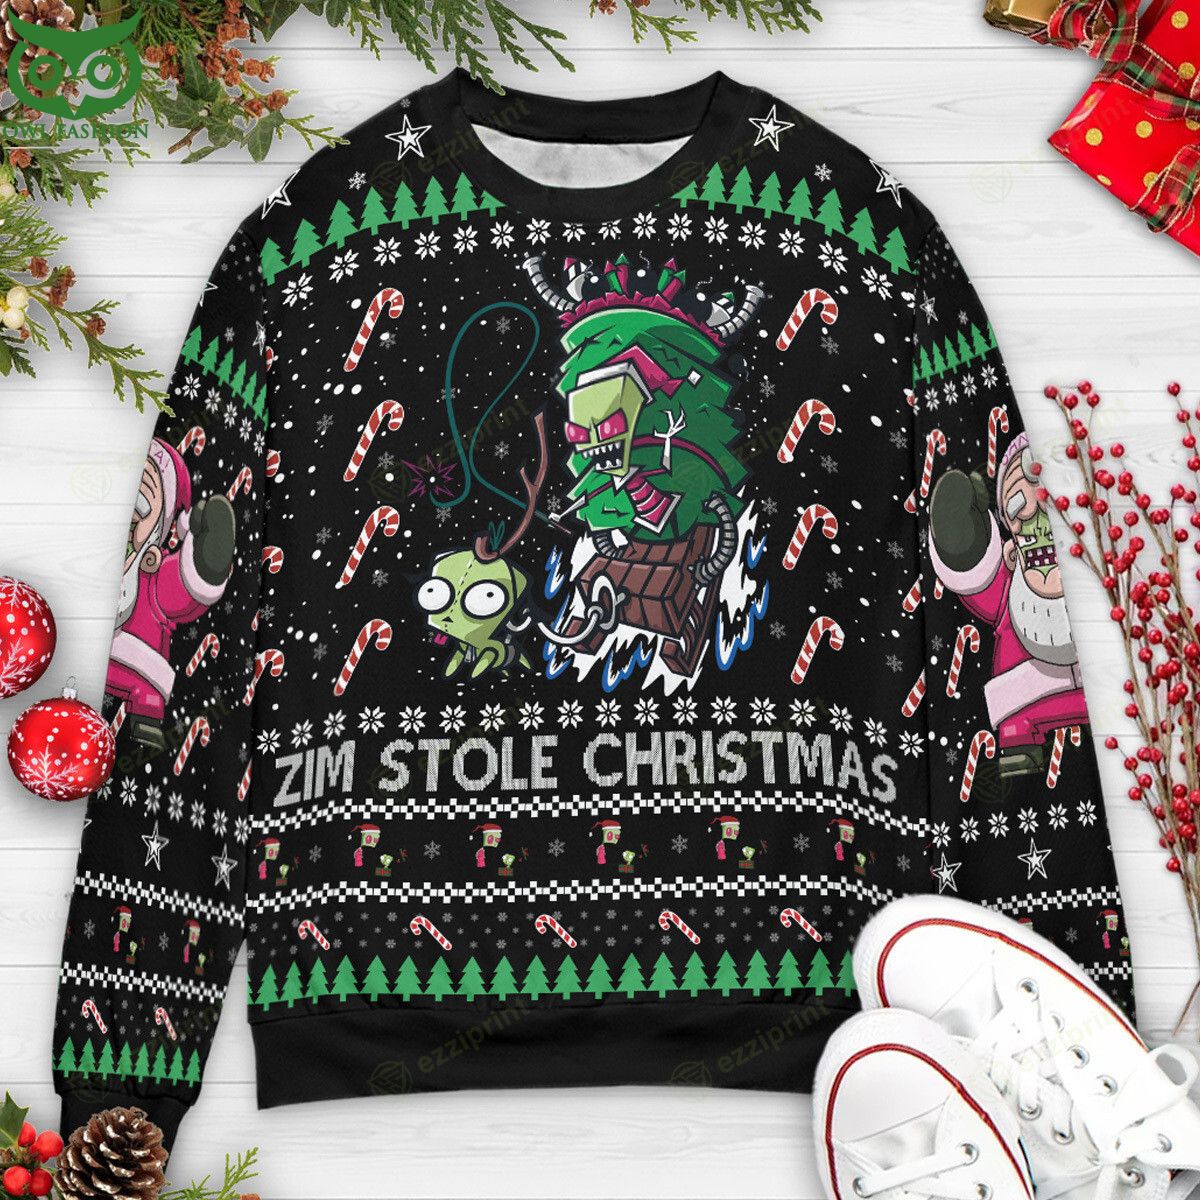 Zim Stole Christmas Invader Zim Sweater This design is visually captivating.